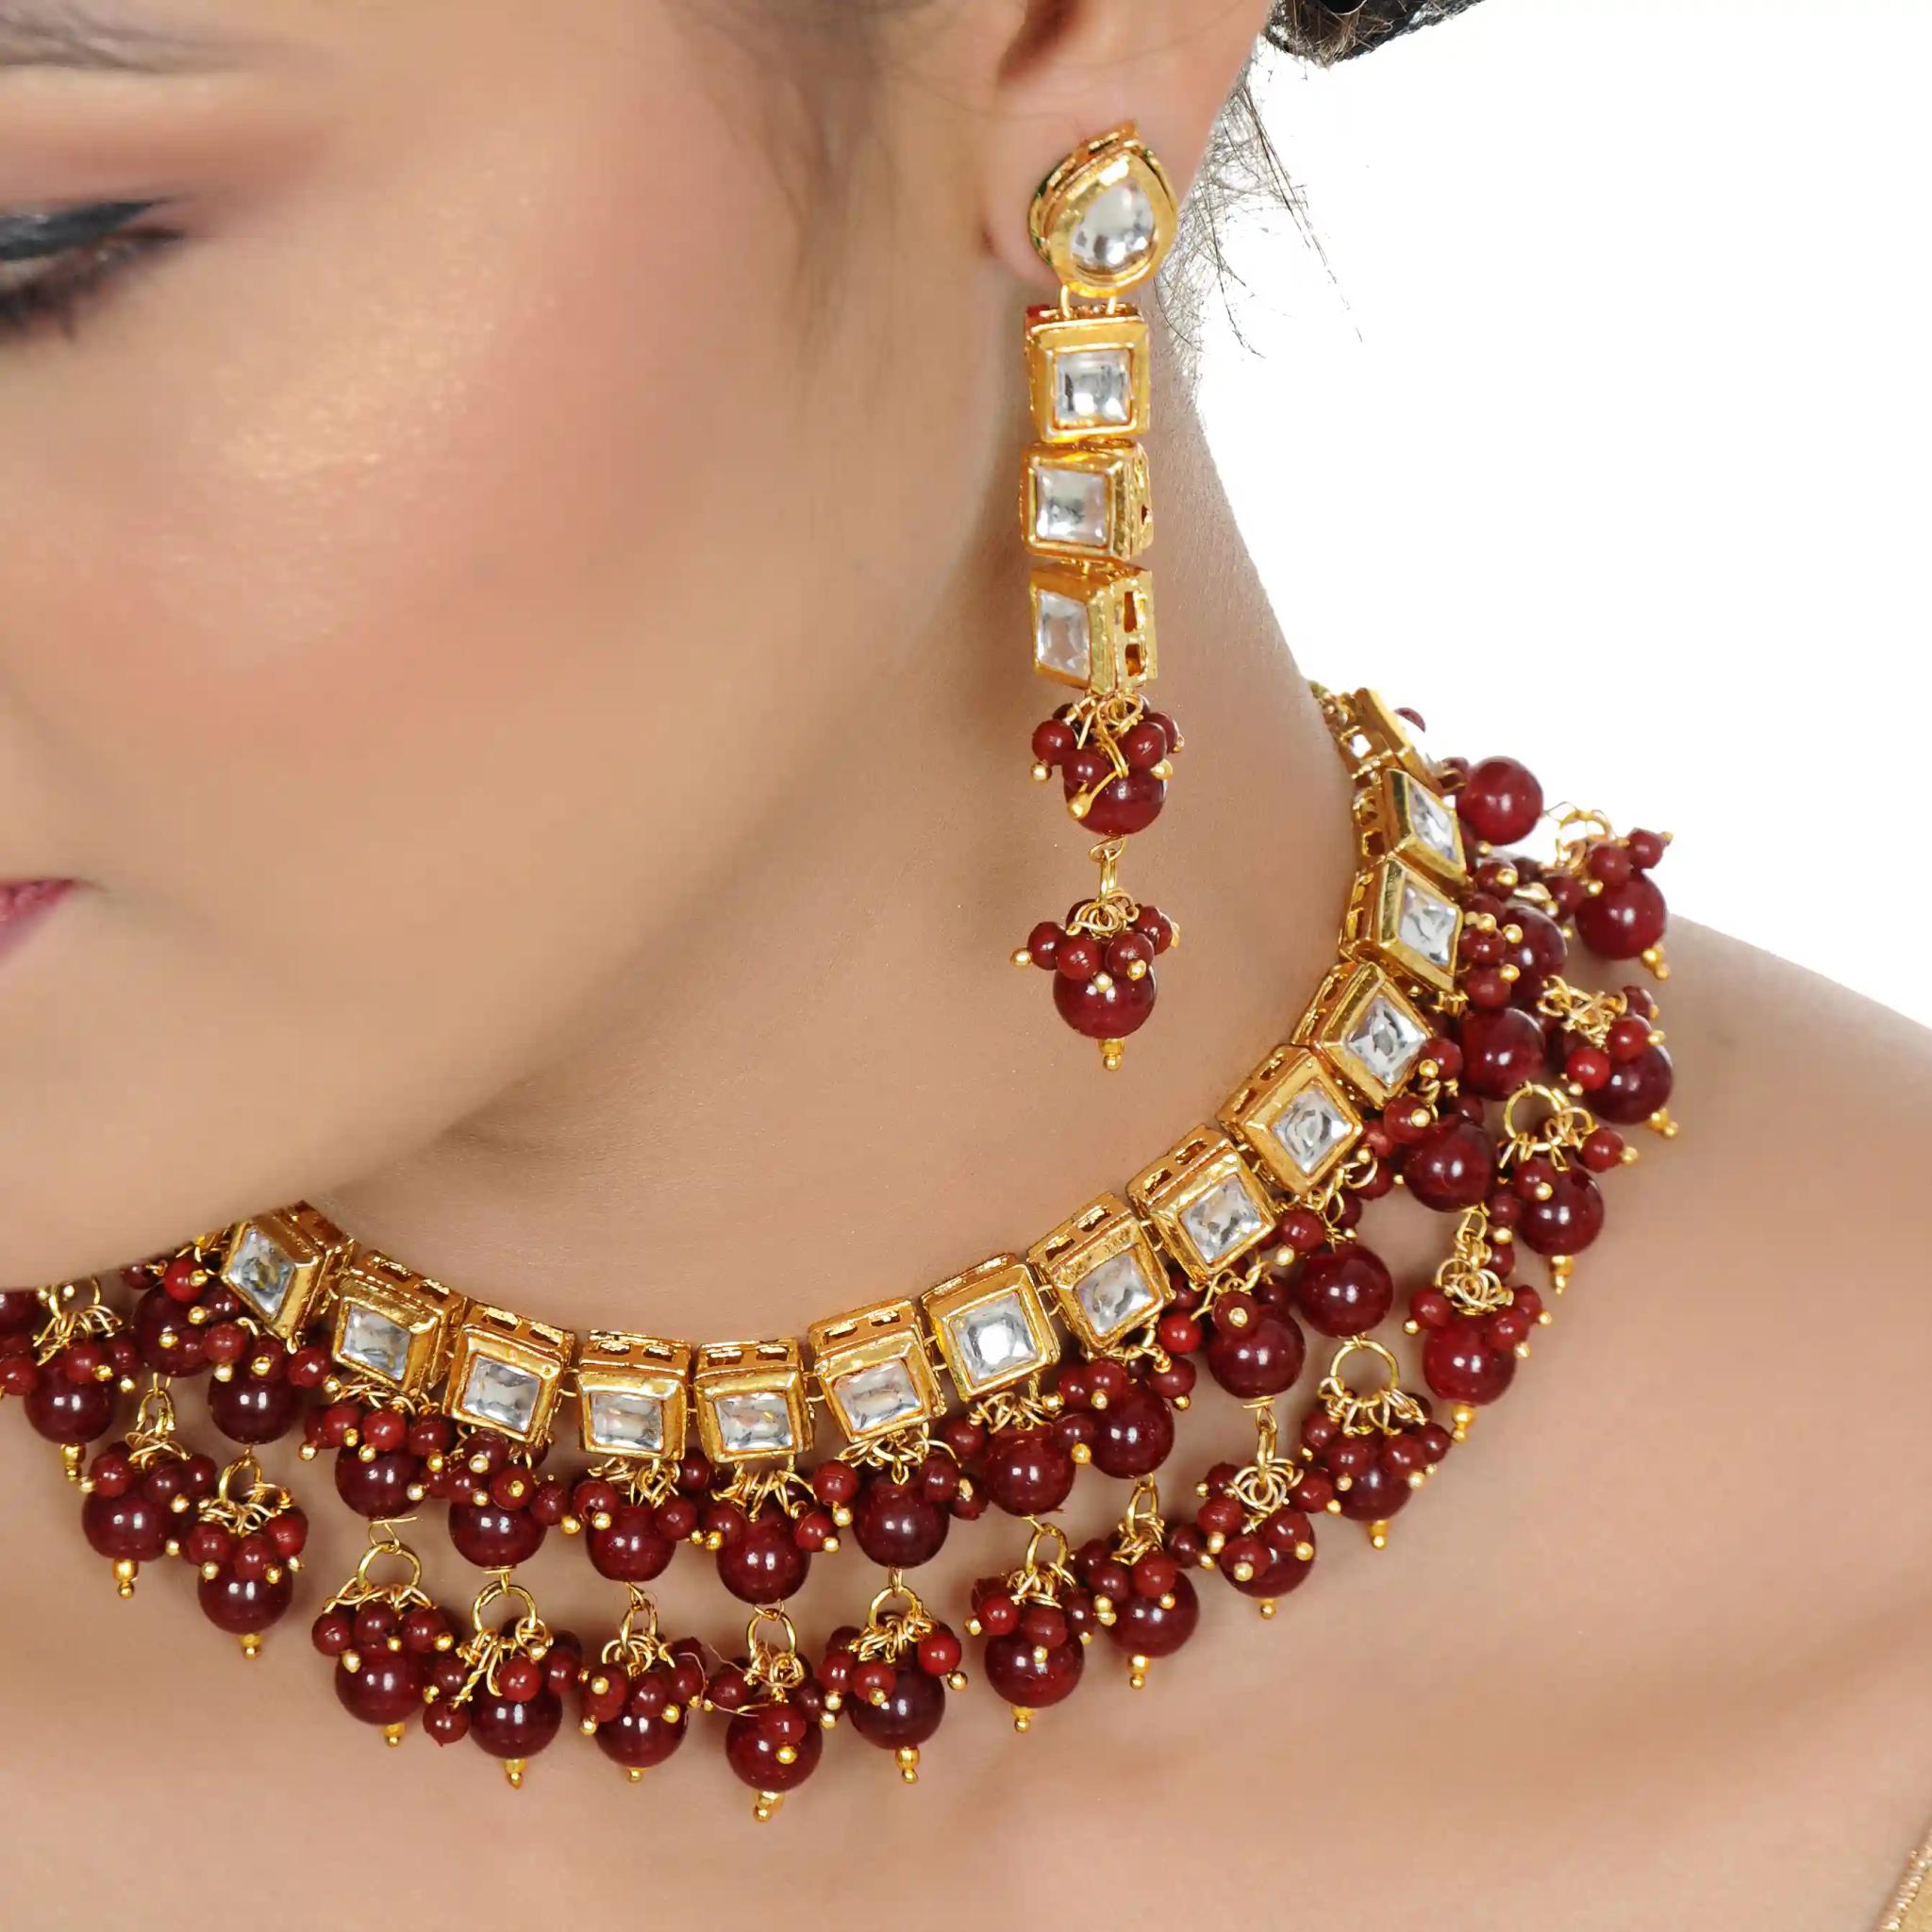 Gold Plated(18k) Square Shape Stone Design Jewellery Set & Maang Tika With Beads - Maroon